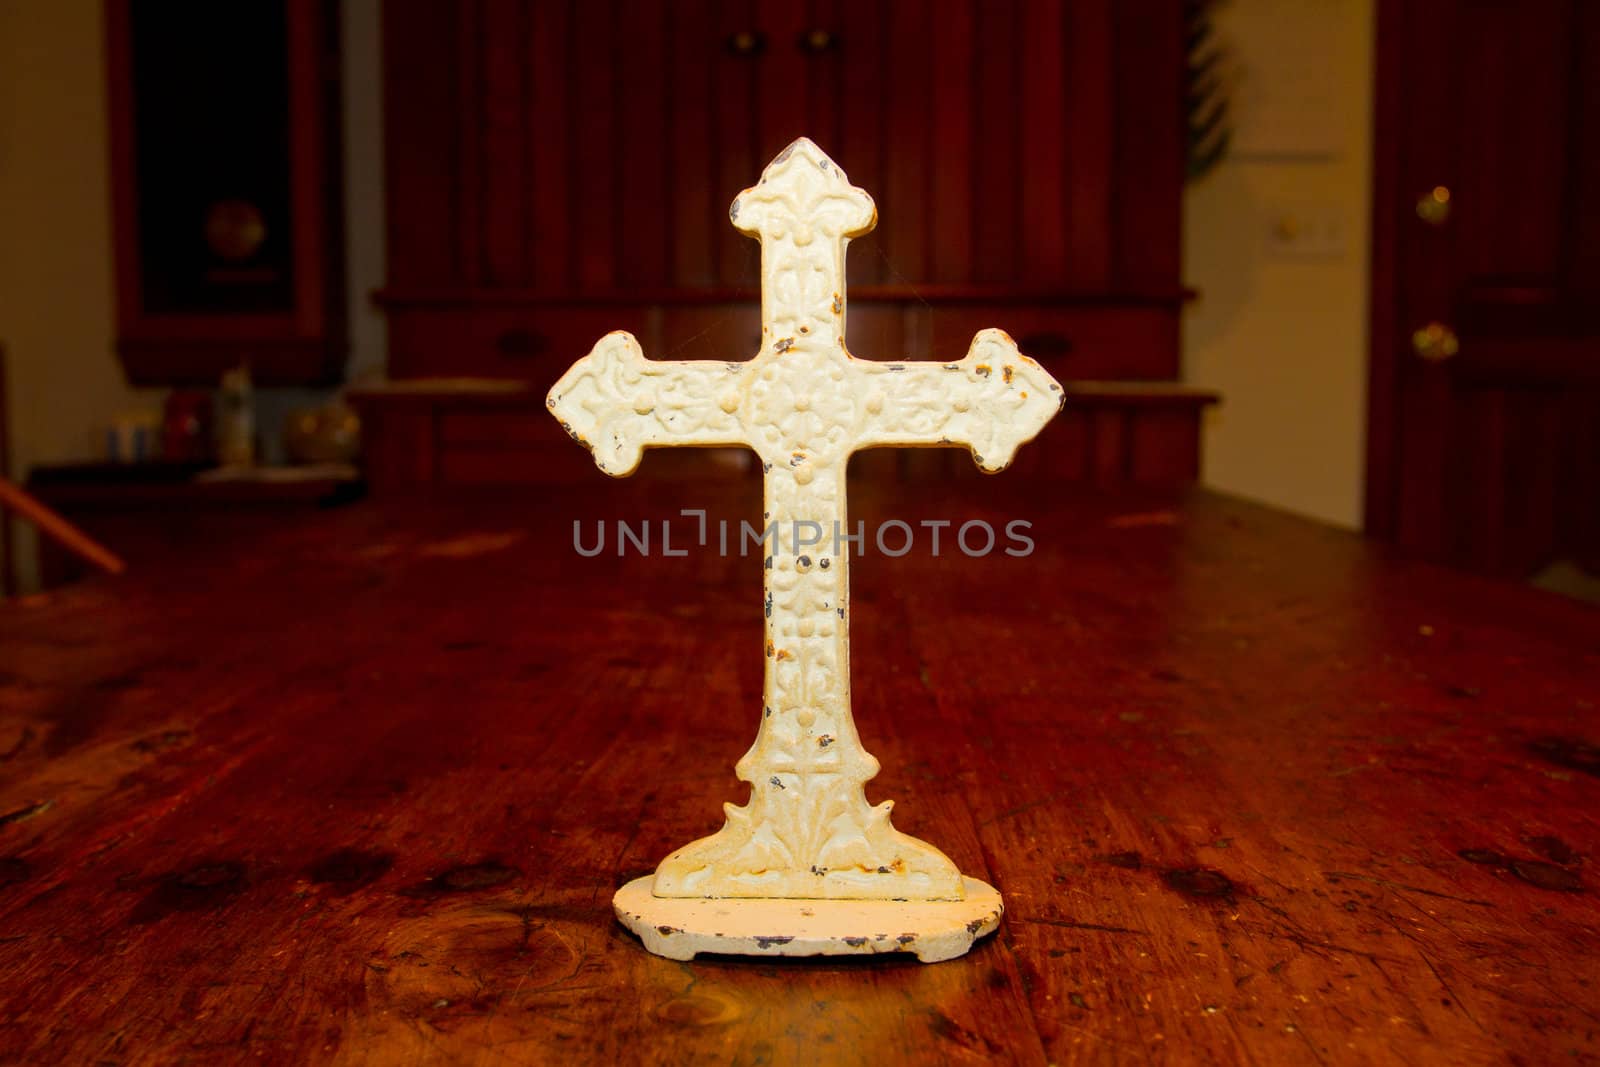 A very old antique white cross photographed on a wood dining table.